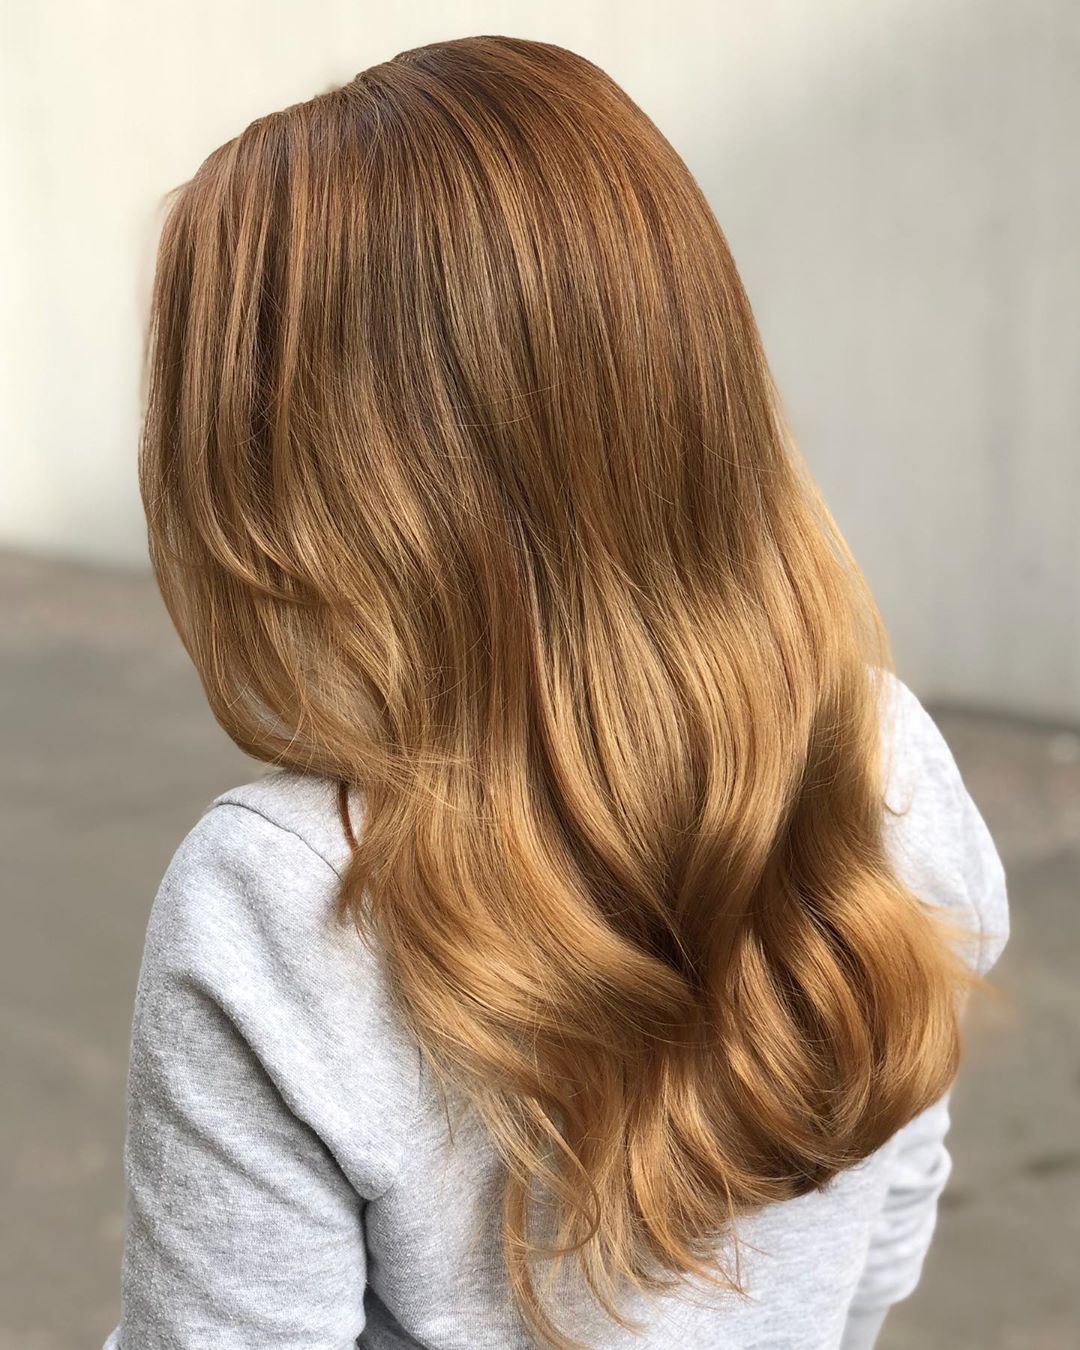 Light Golden Brown Hair Color: What It Looks Like & 15 Trendy Ideas